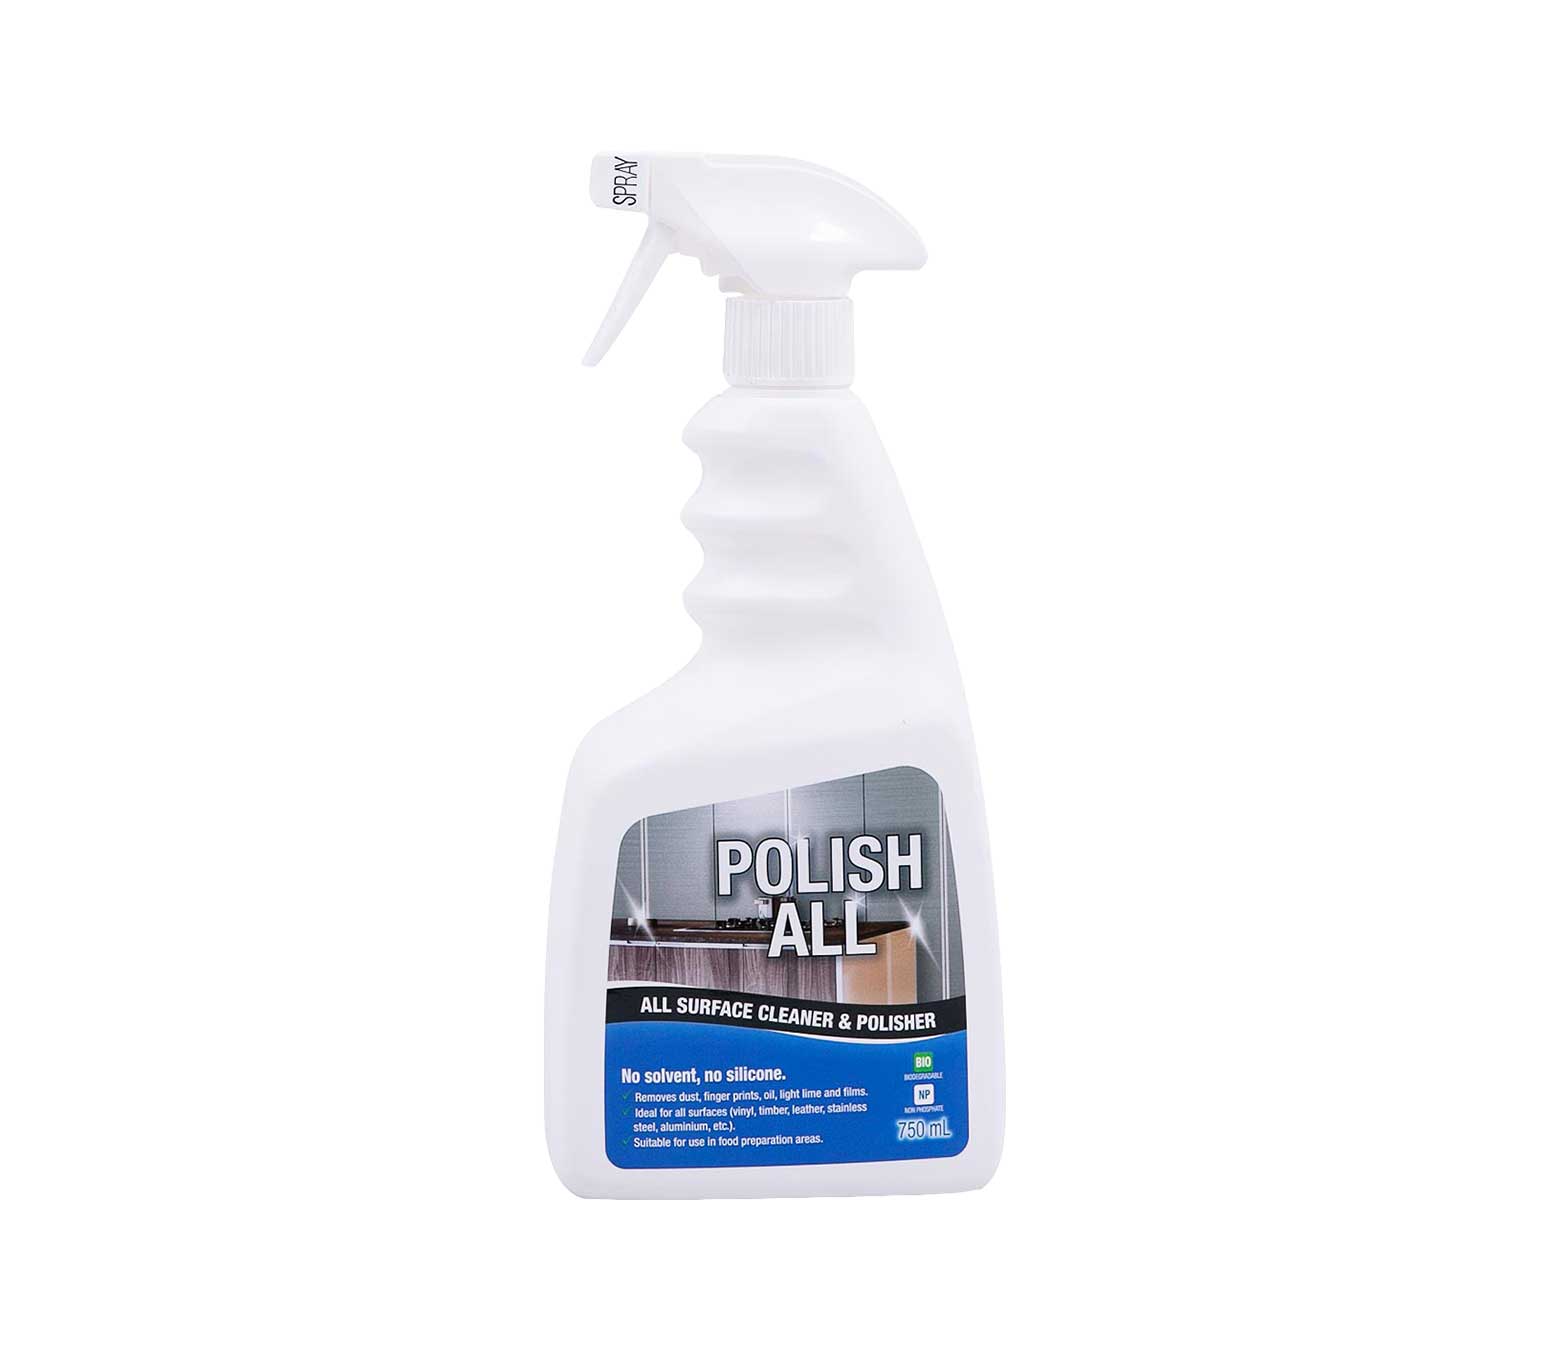 Polish All - No solvent and silicone.